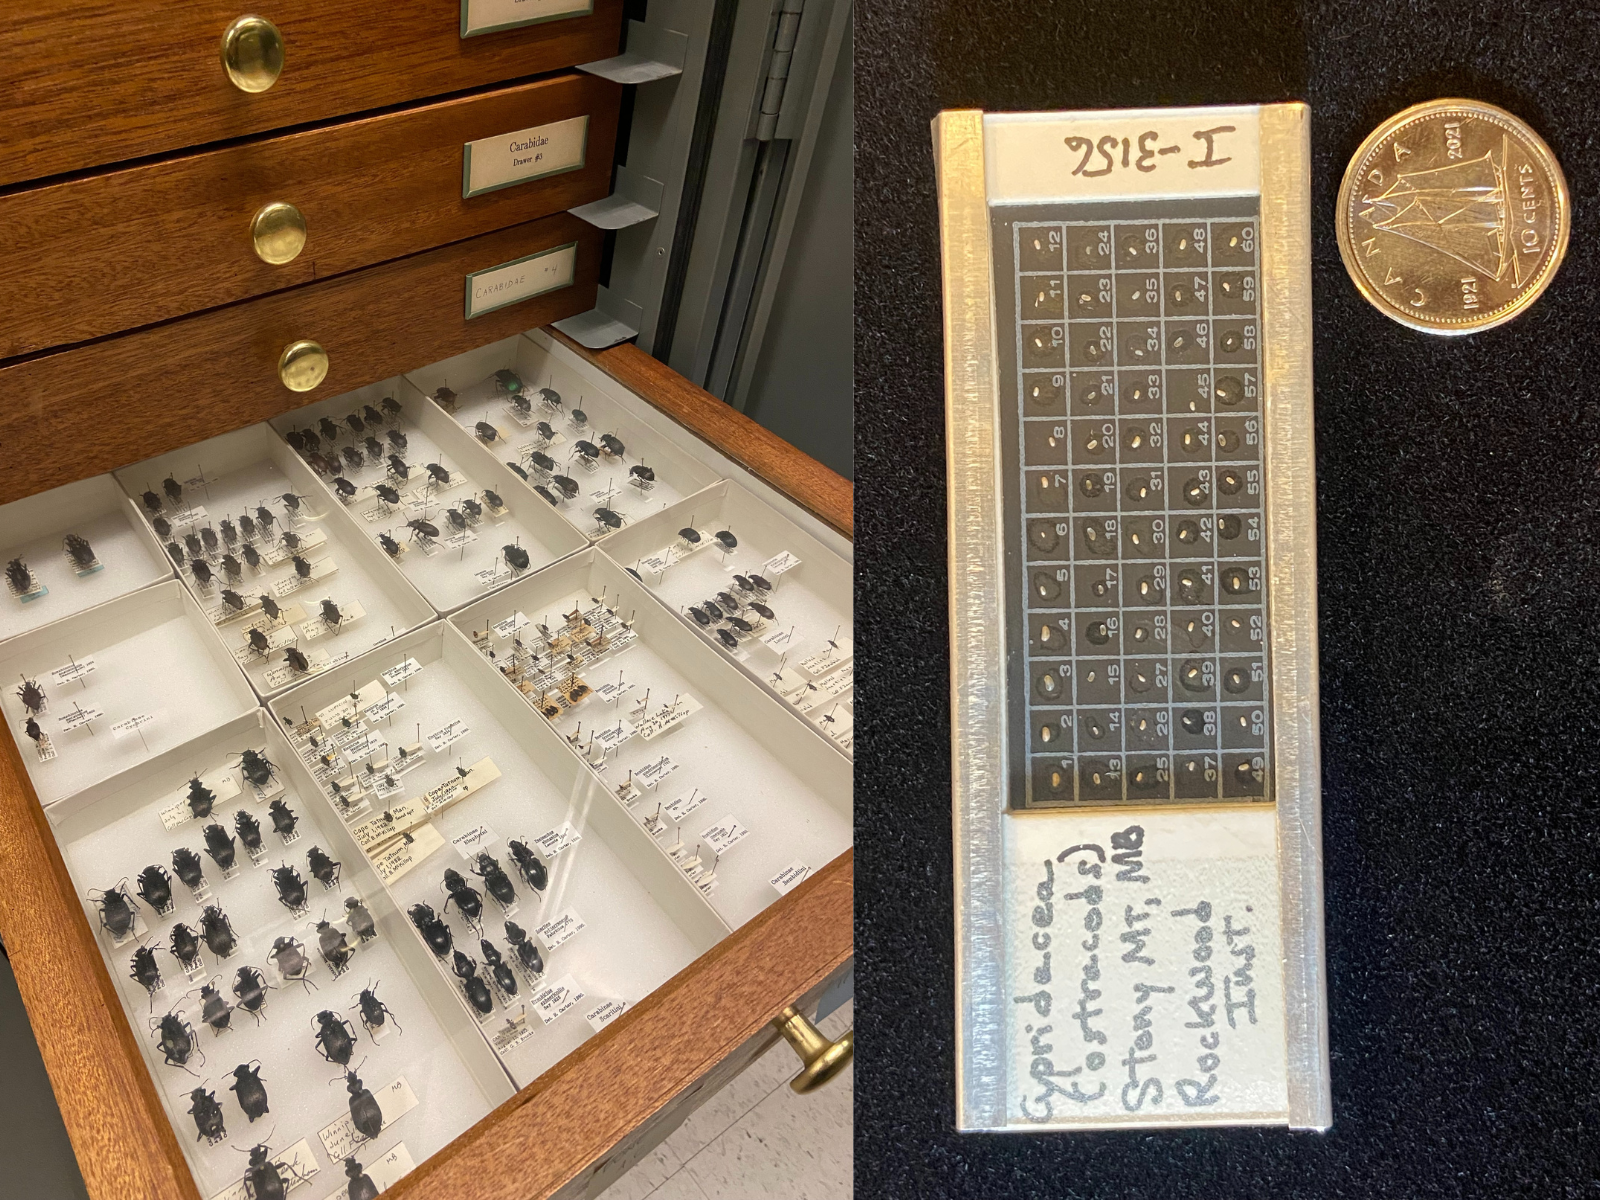 Two images. Left: An open drawer containing pinned beetles stored in interior boxes. Right: A microscope slide with 60 micro fossils adhered to the surface placed beside a dime for scale.